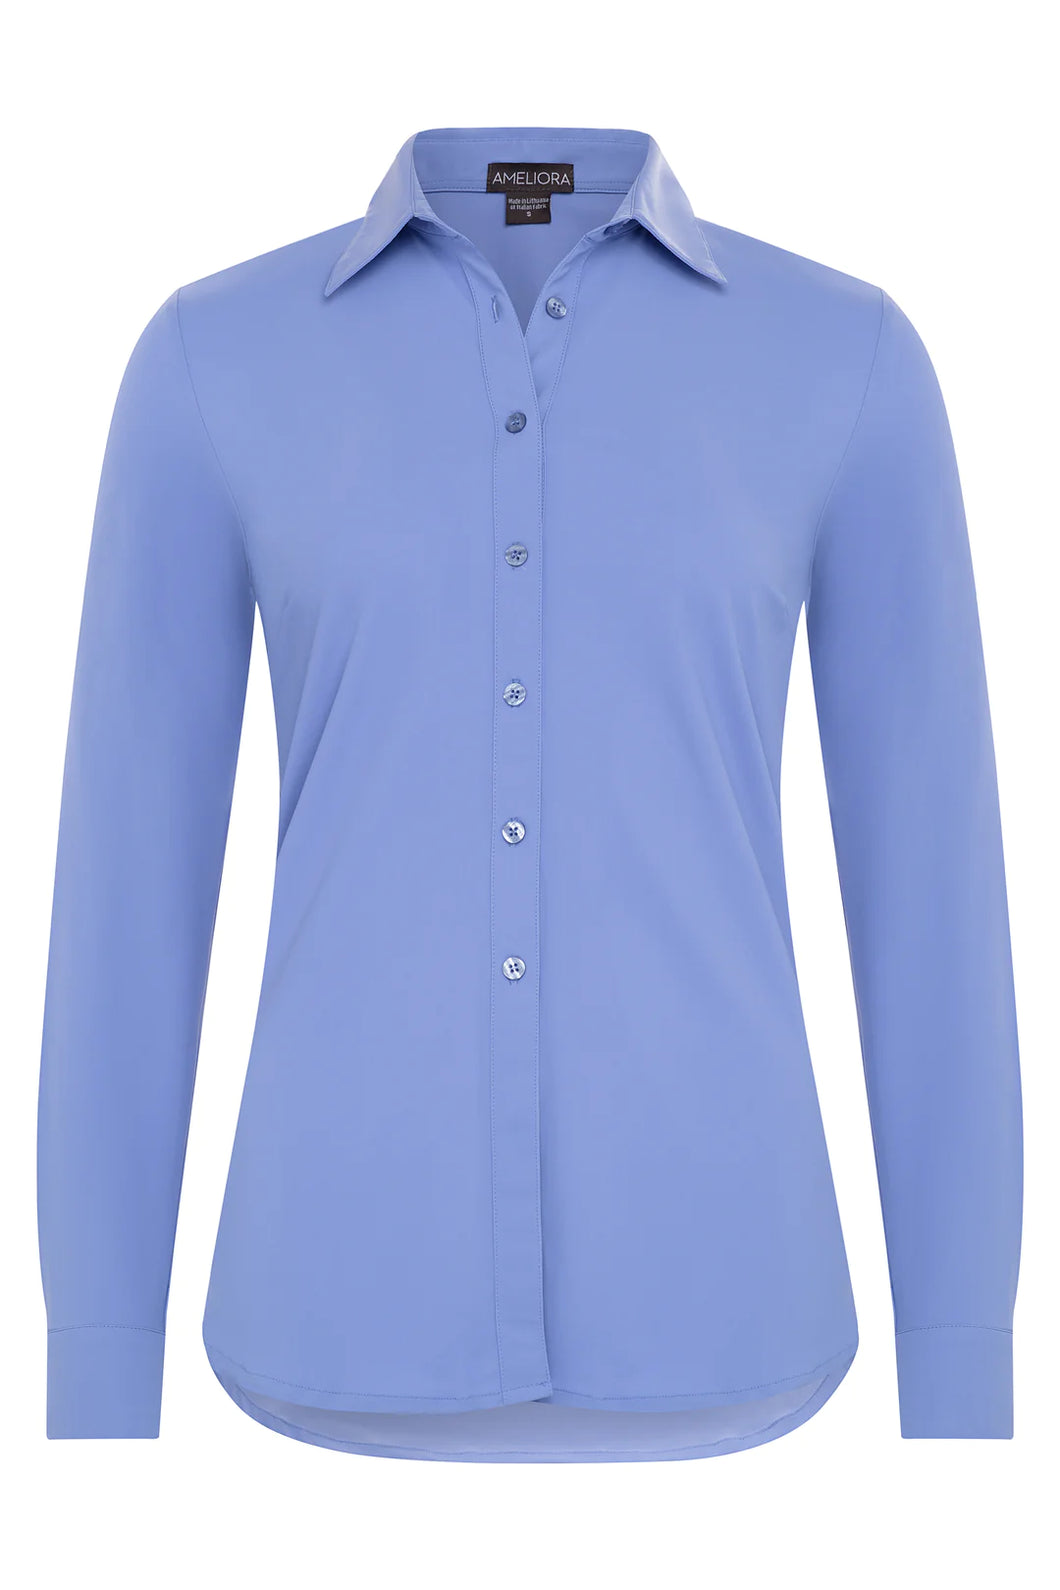 The Sullivan Long Sleeve Button Up Shirt in Peri by Ameliora